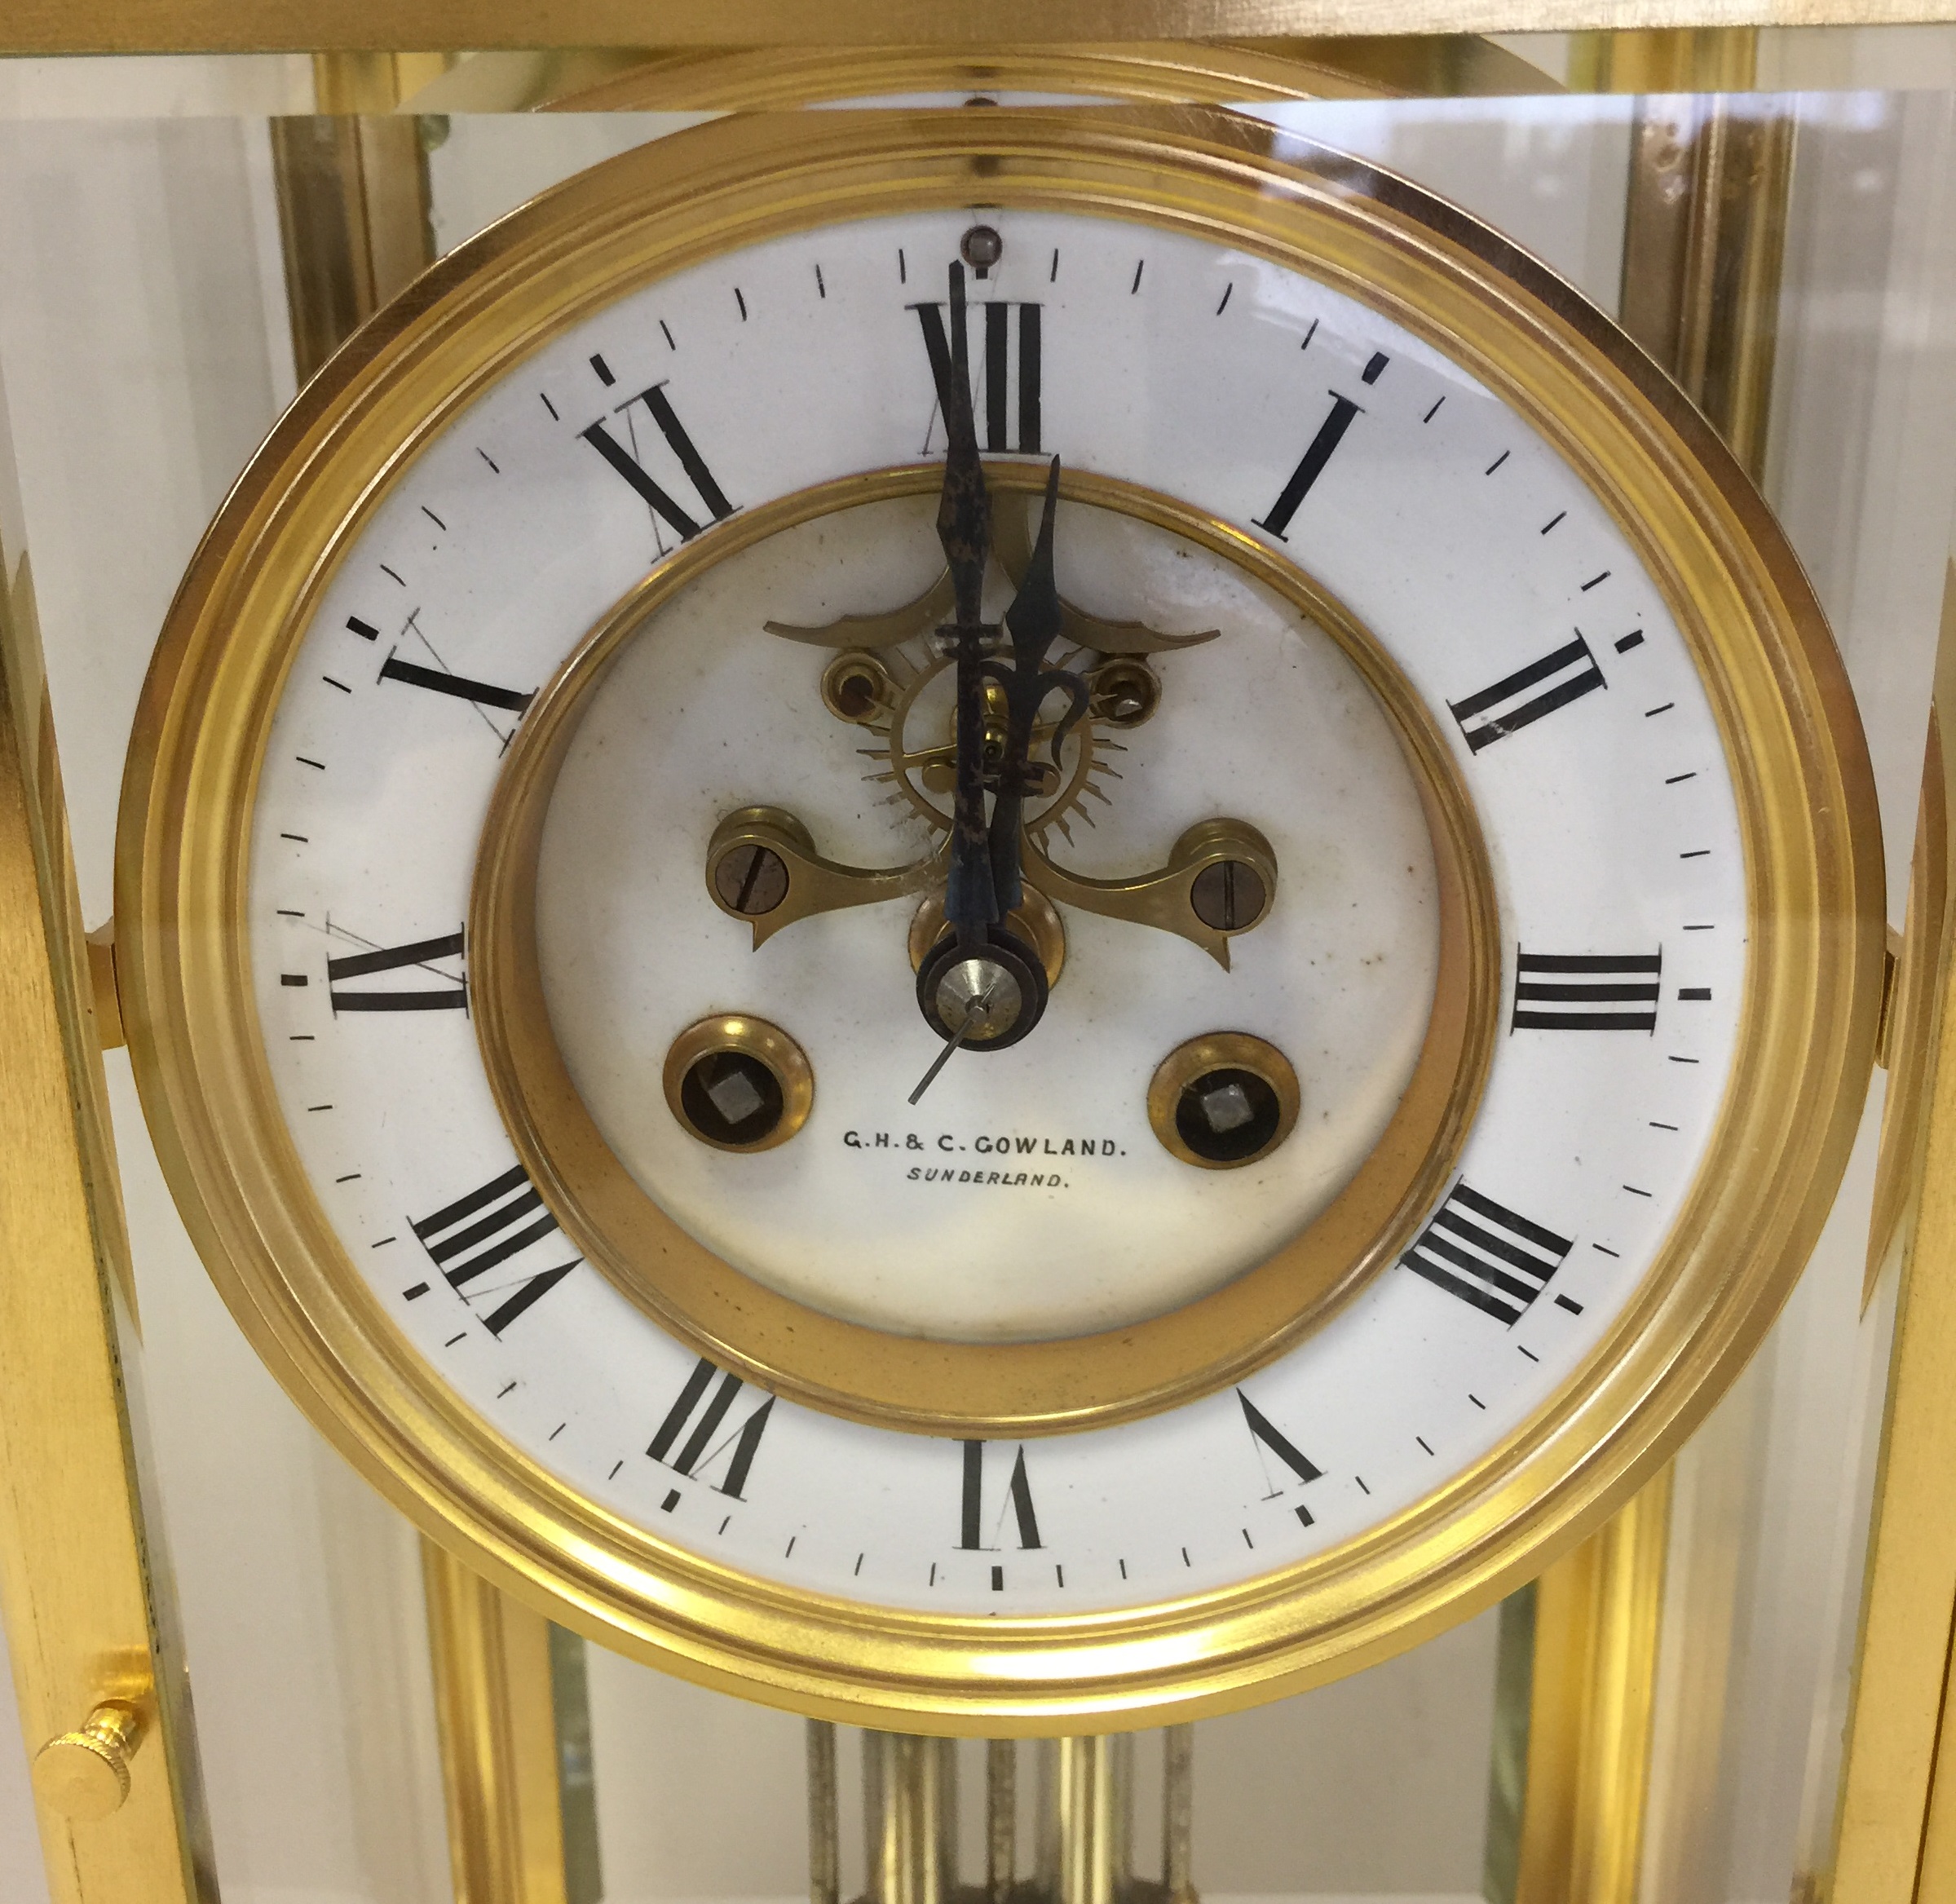 FRENCH FOUR GLASS MANTEL CLOCK. Marked to face G.H & C Gowland, Sunderland. Probably circa 1860s. - Image 2 of 8